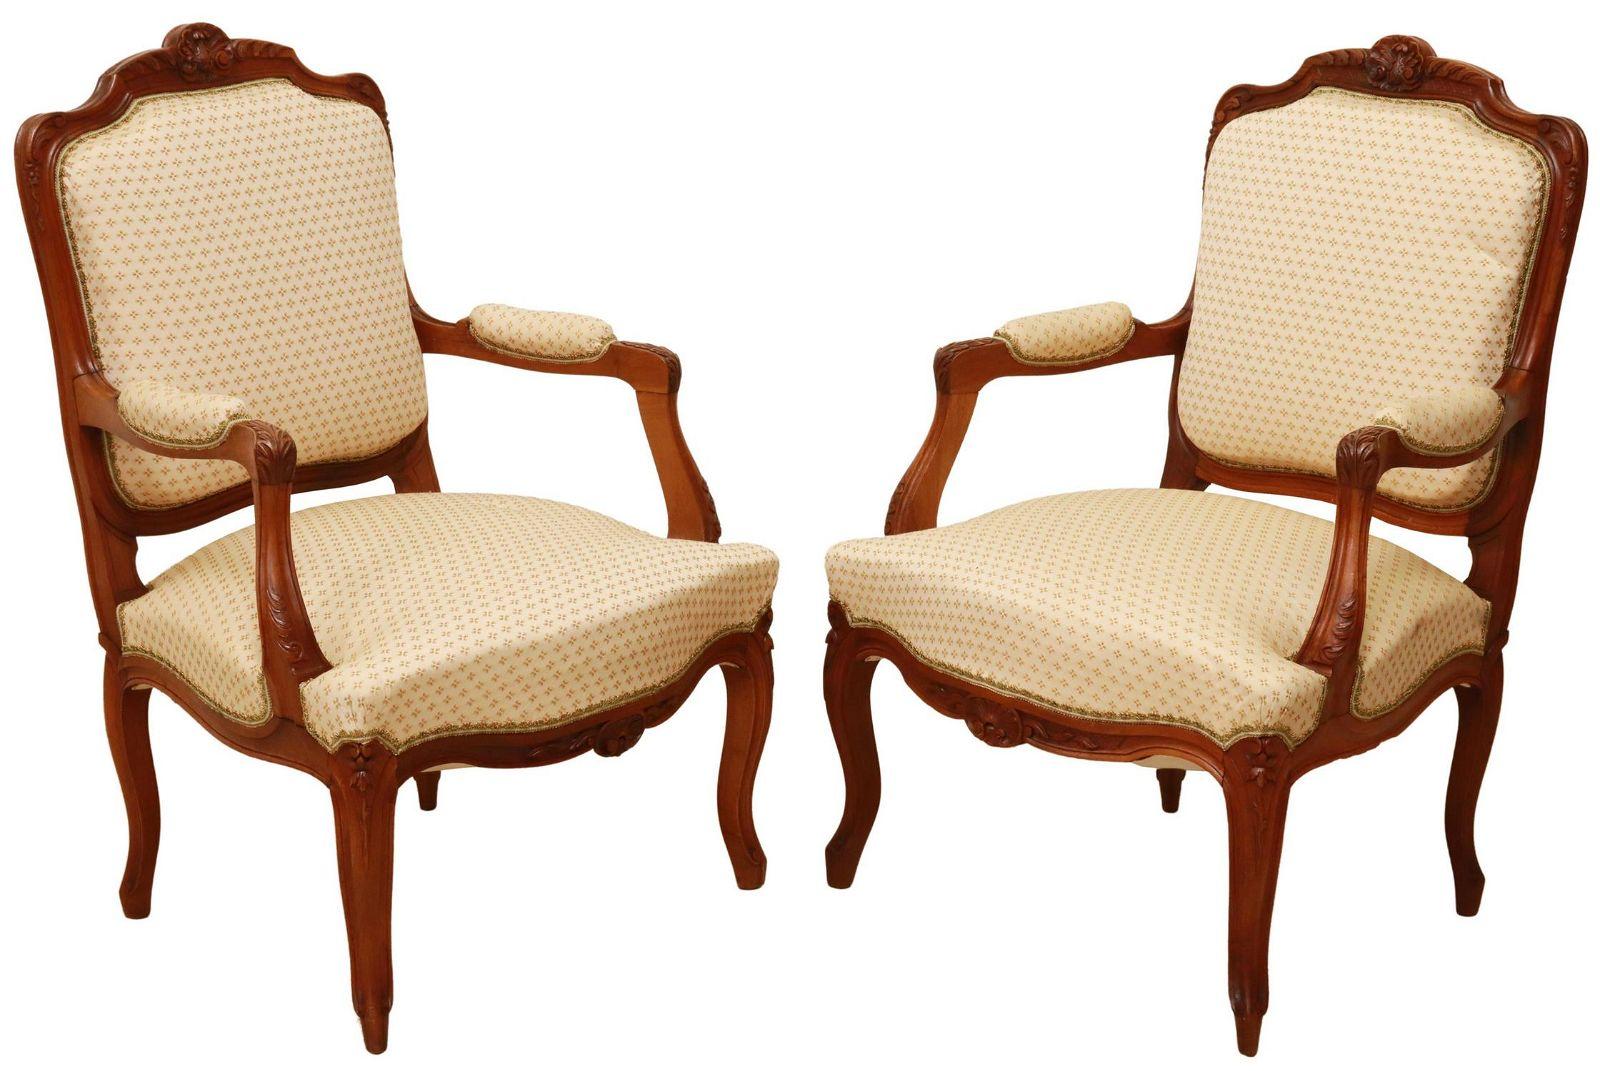 French Provincial French Louis XV Style Upholstered Fauteuils Arm Chairs, a Pair For Sale